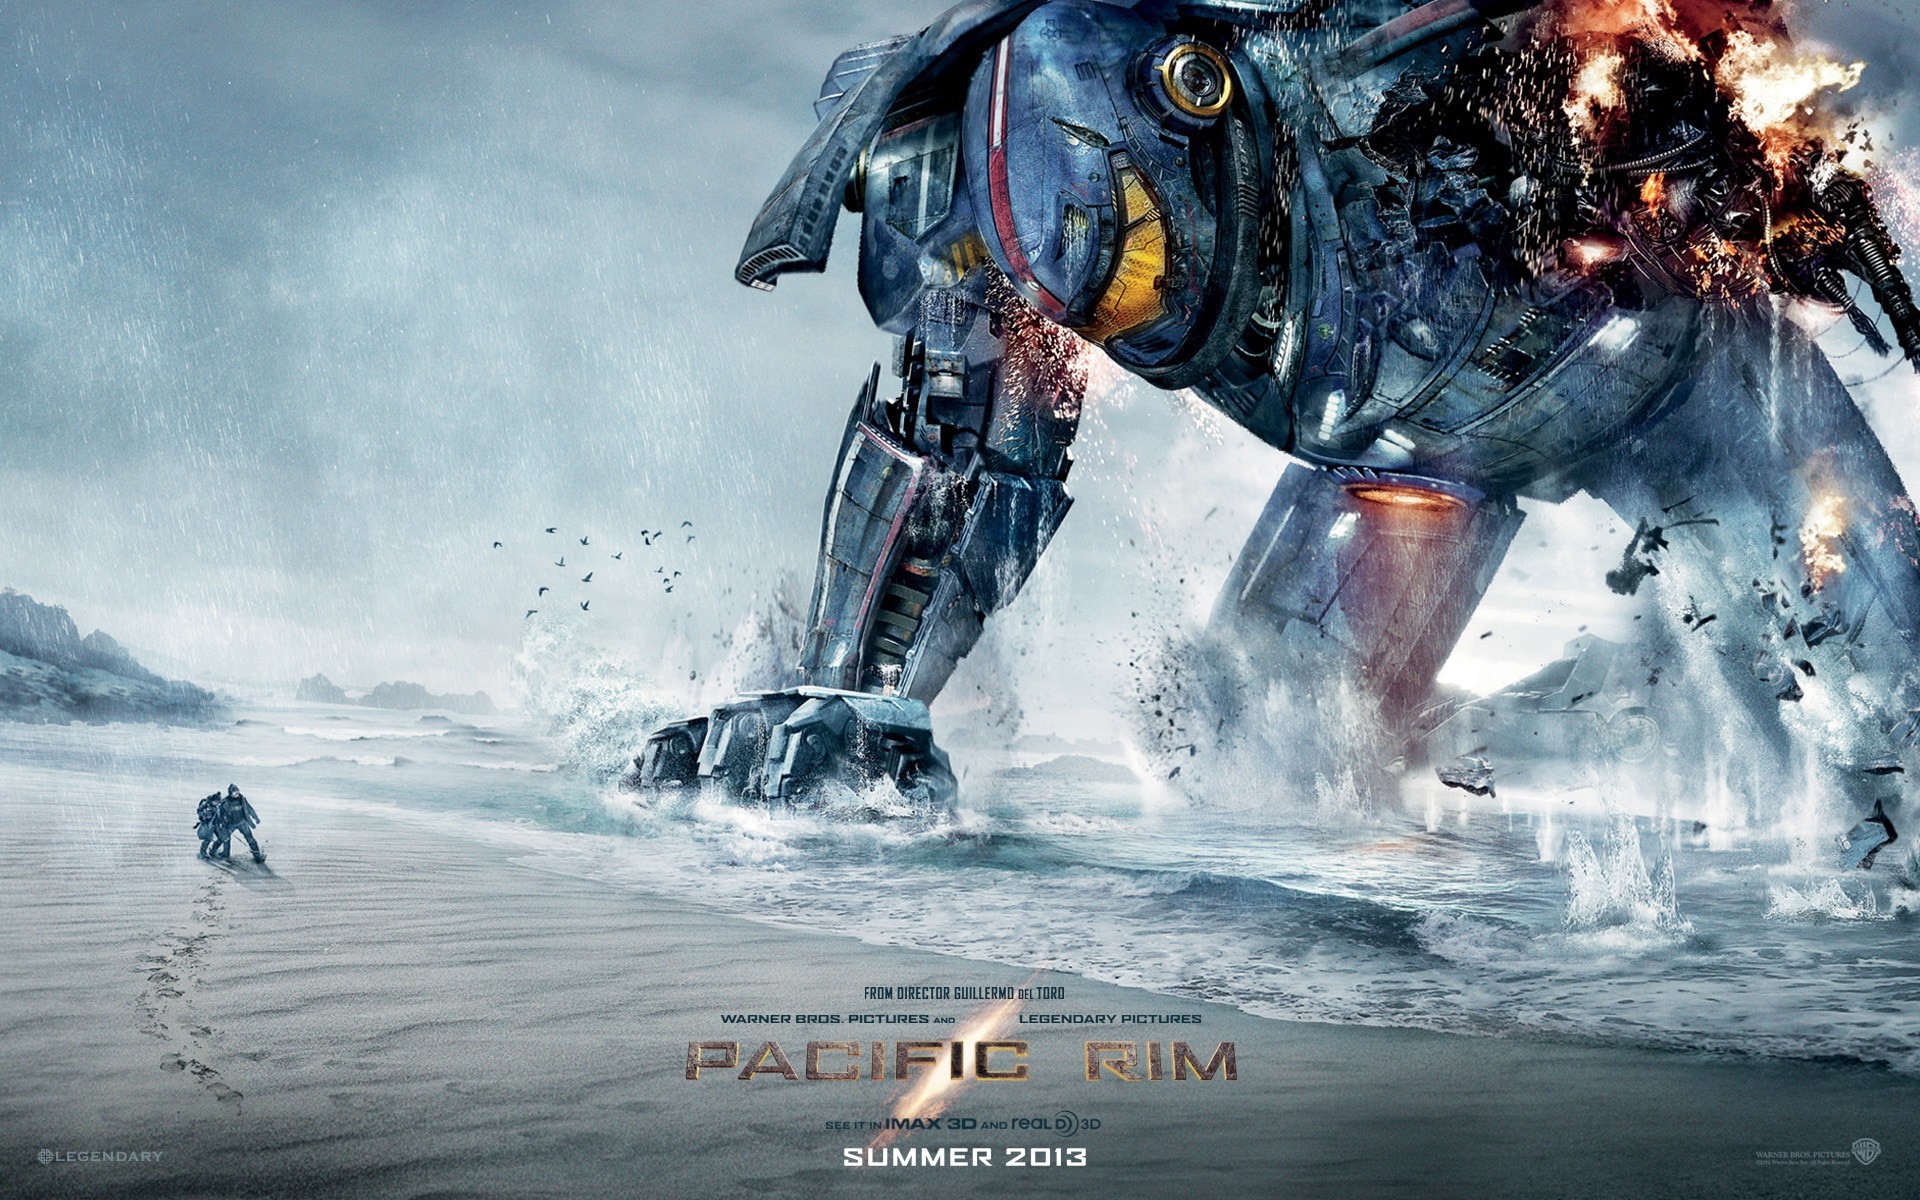 Robot at the shore of the movie Pacific Rim